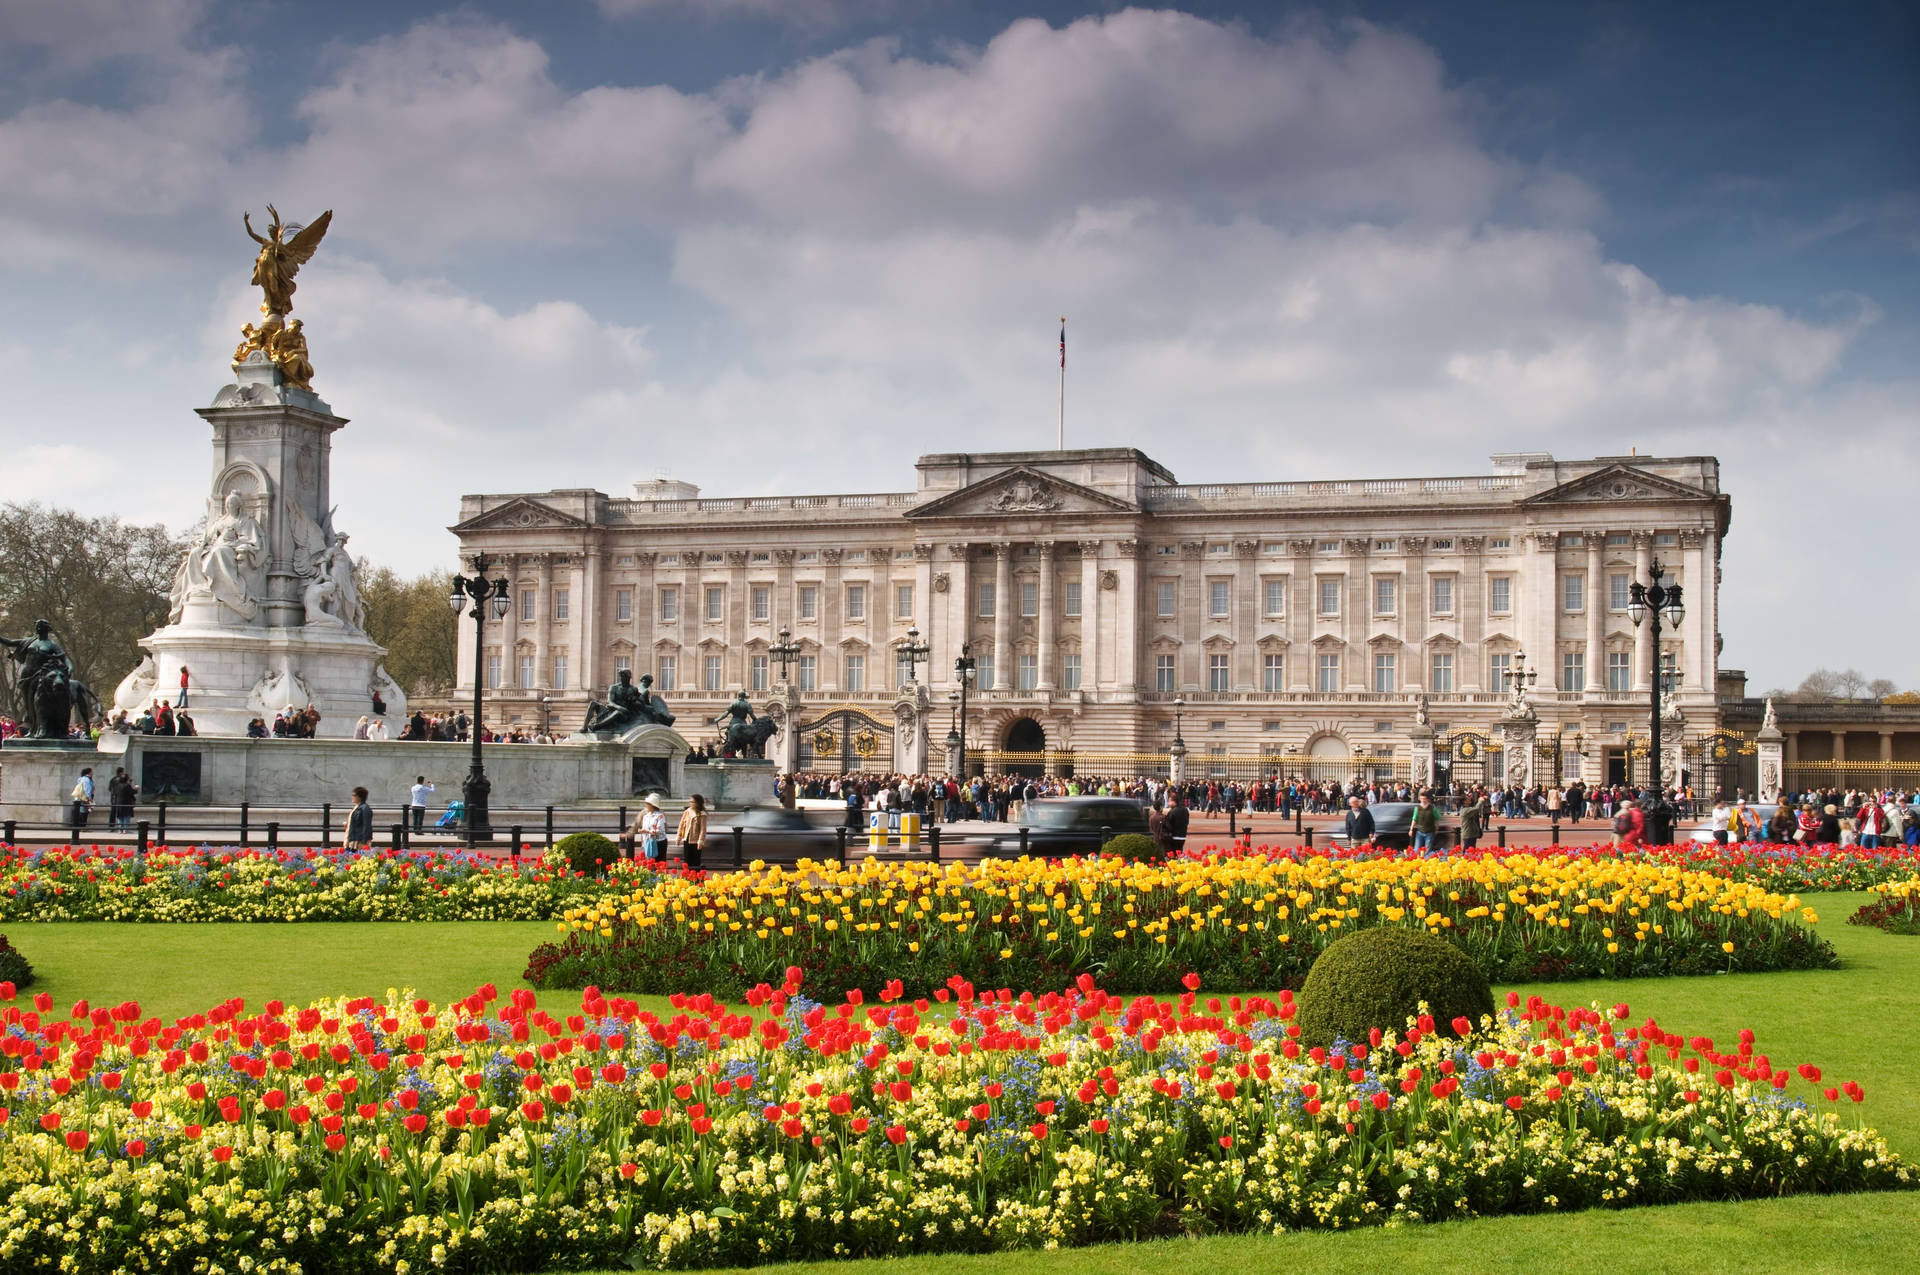 Serene view of Buckingham Palace with a blooming garden. Wallpaper